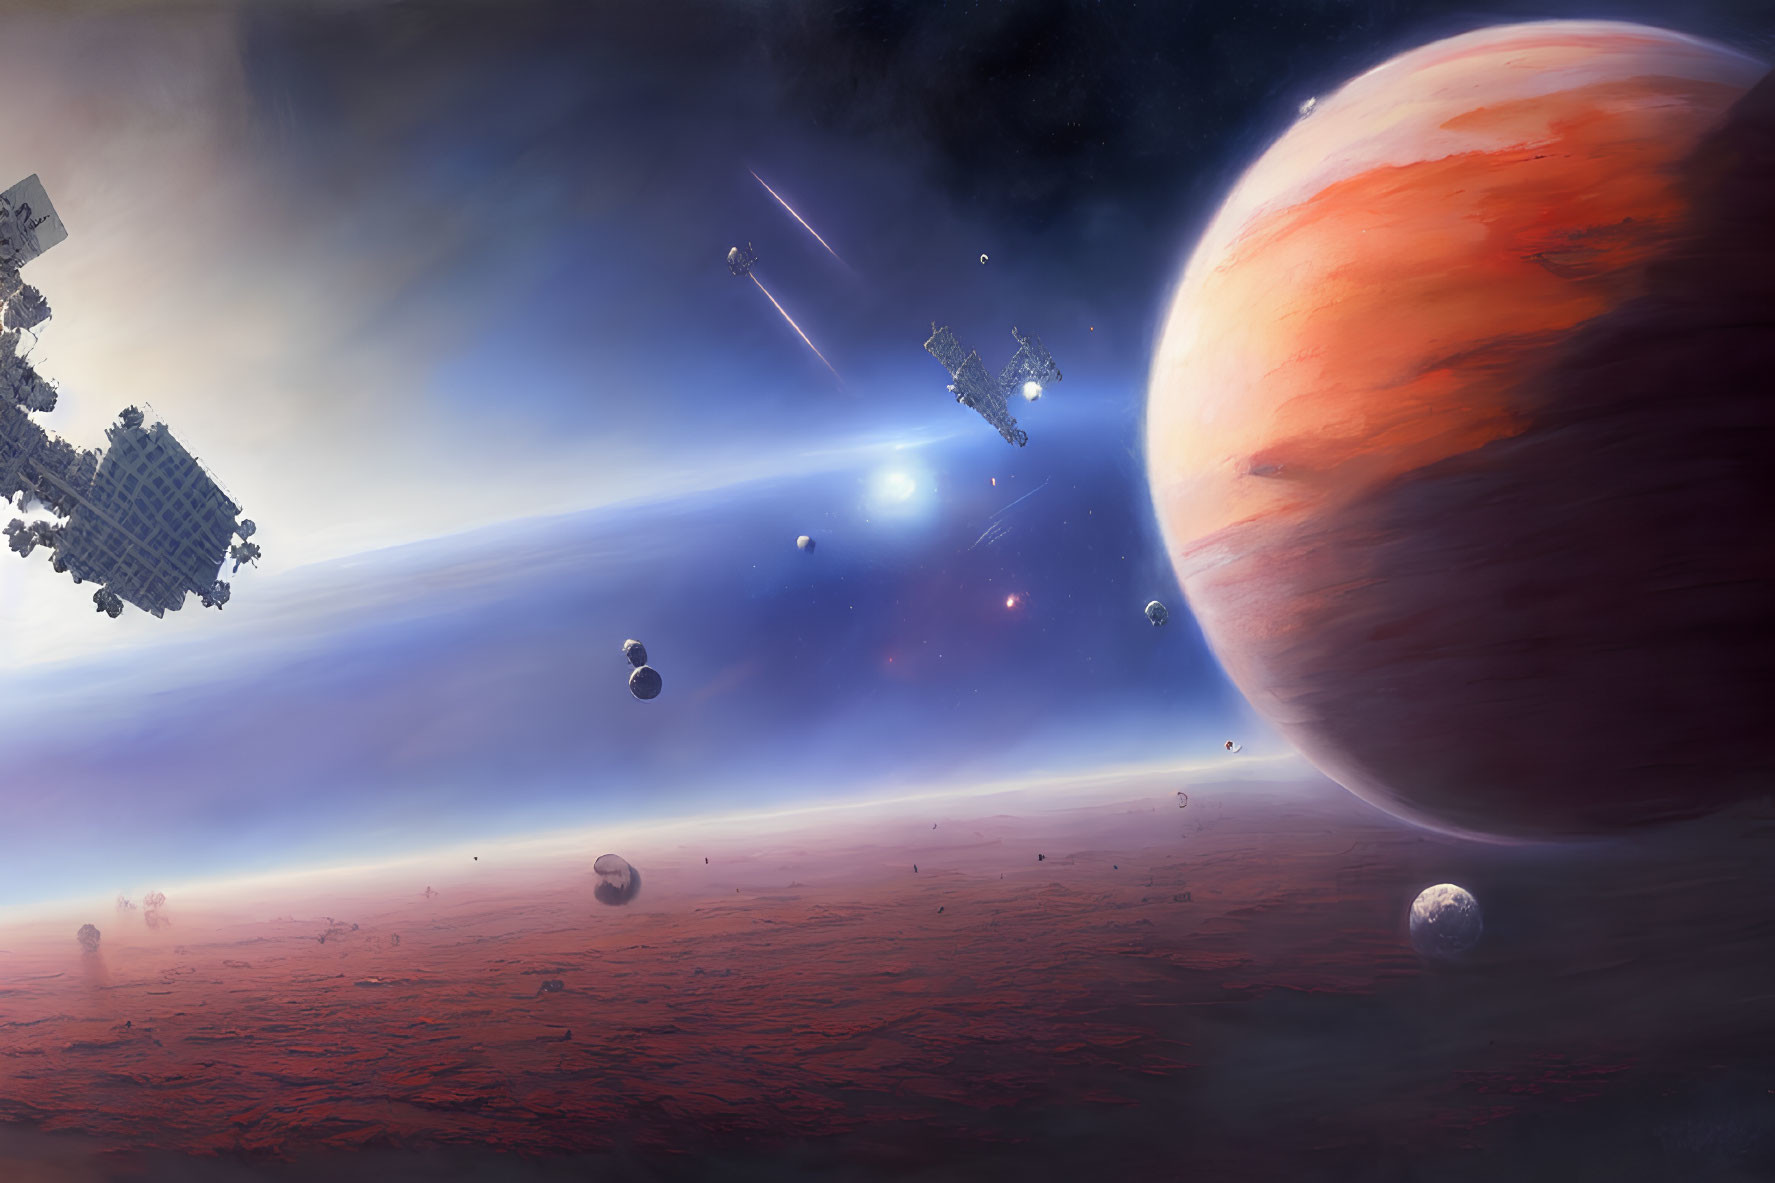 Sci-fi scene: spaceships, red planet, floating rocks, distant sun